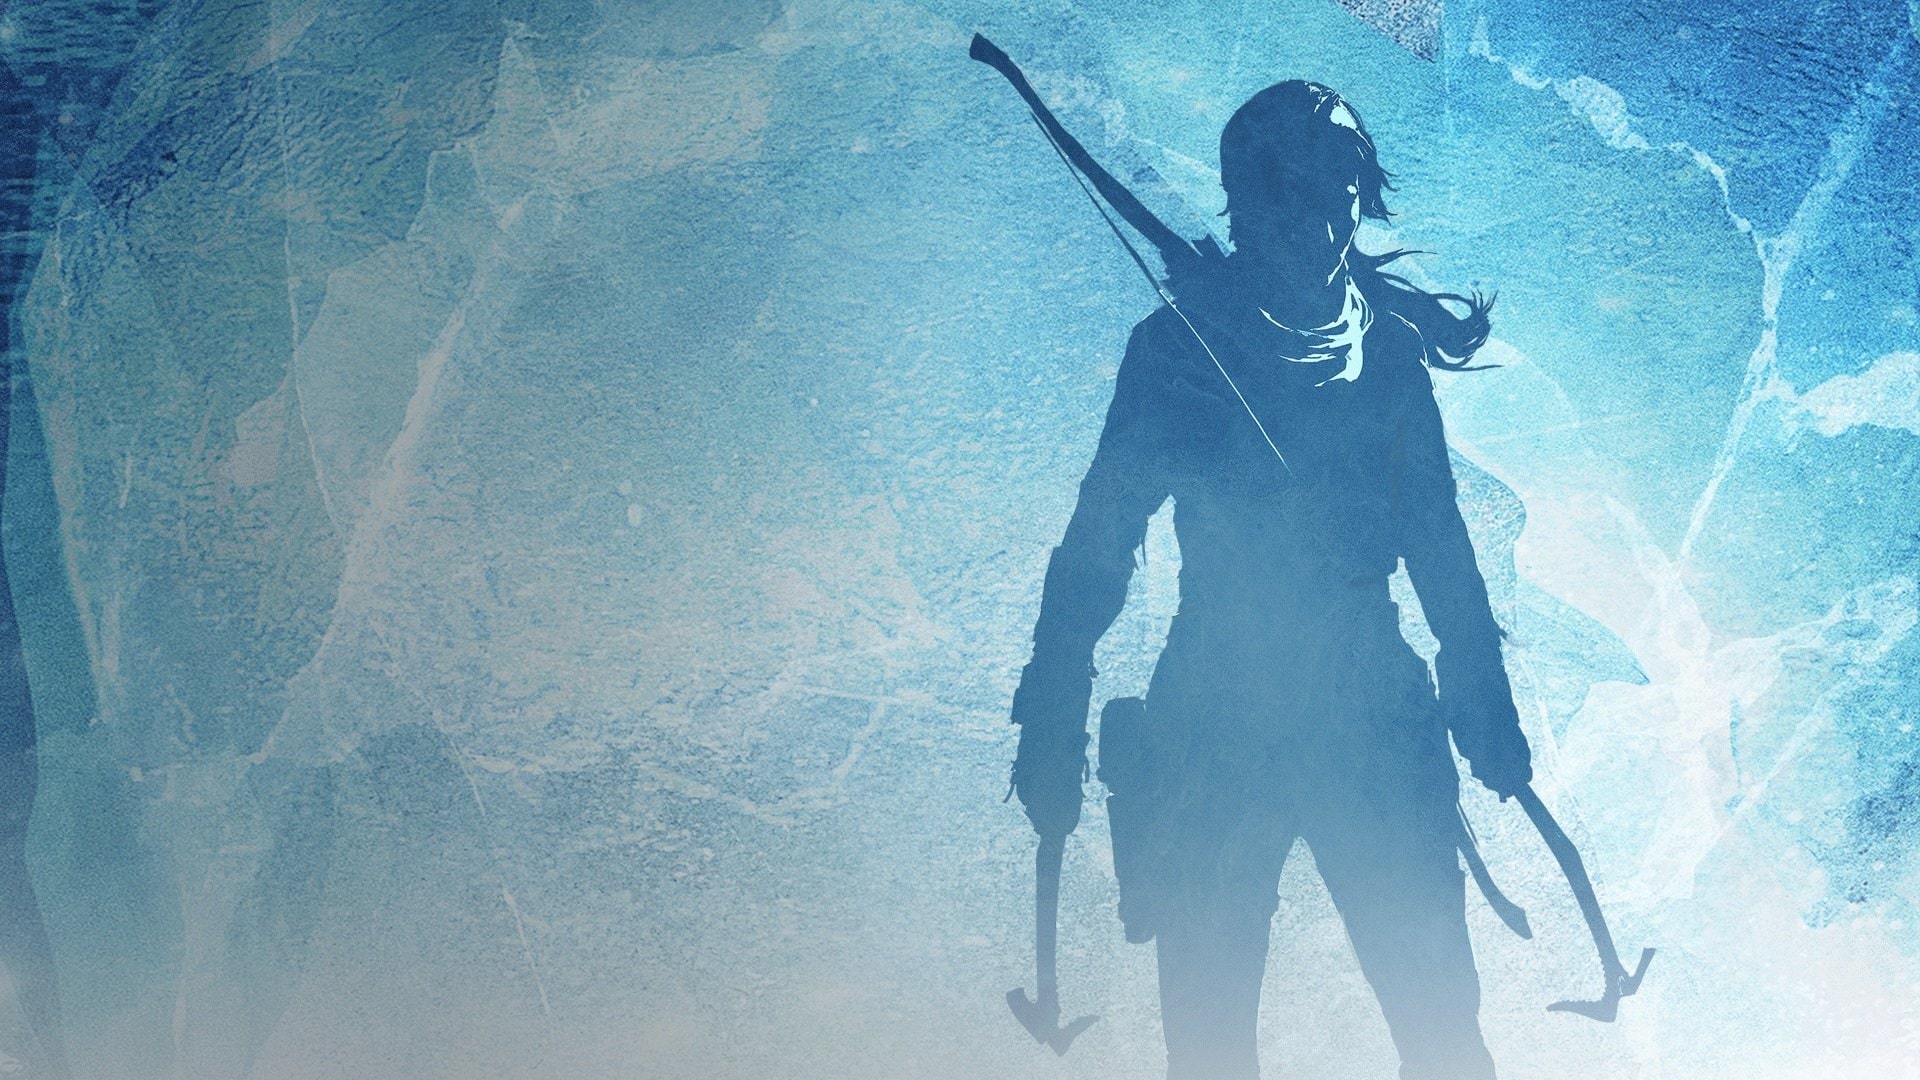  Rise of the Tomb Raider: 20 Year Celebration - PlayStation 4 :  Square Enix LLC: Video Games